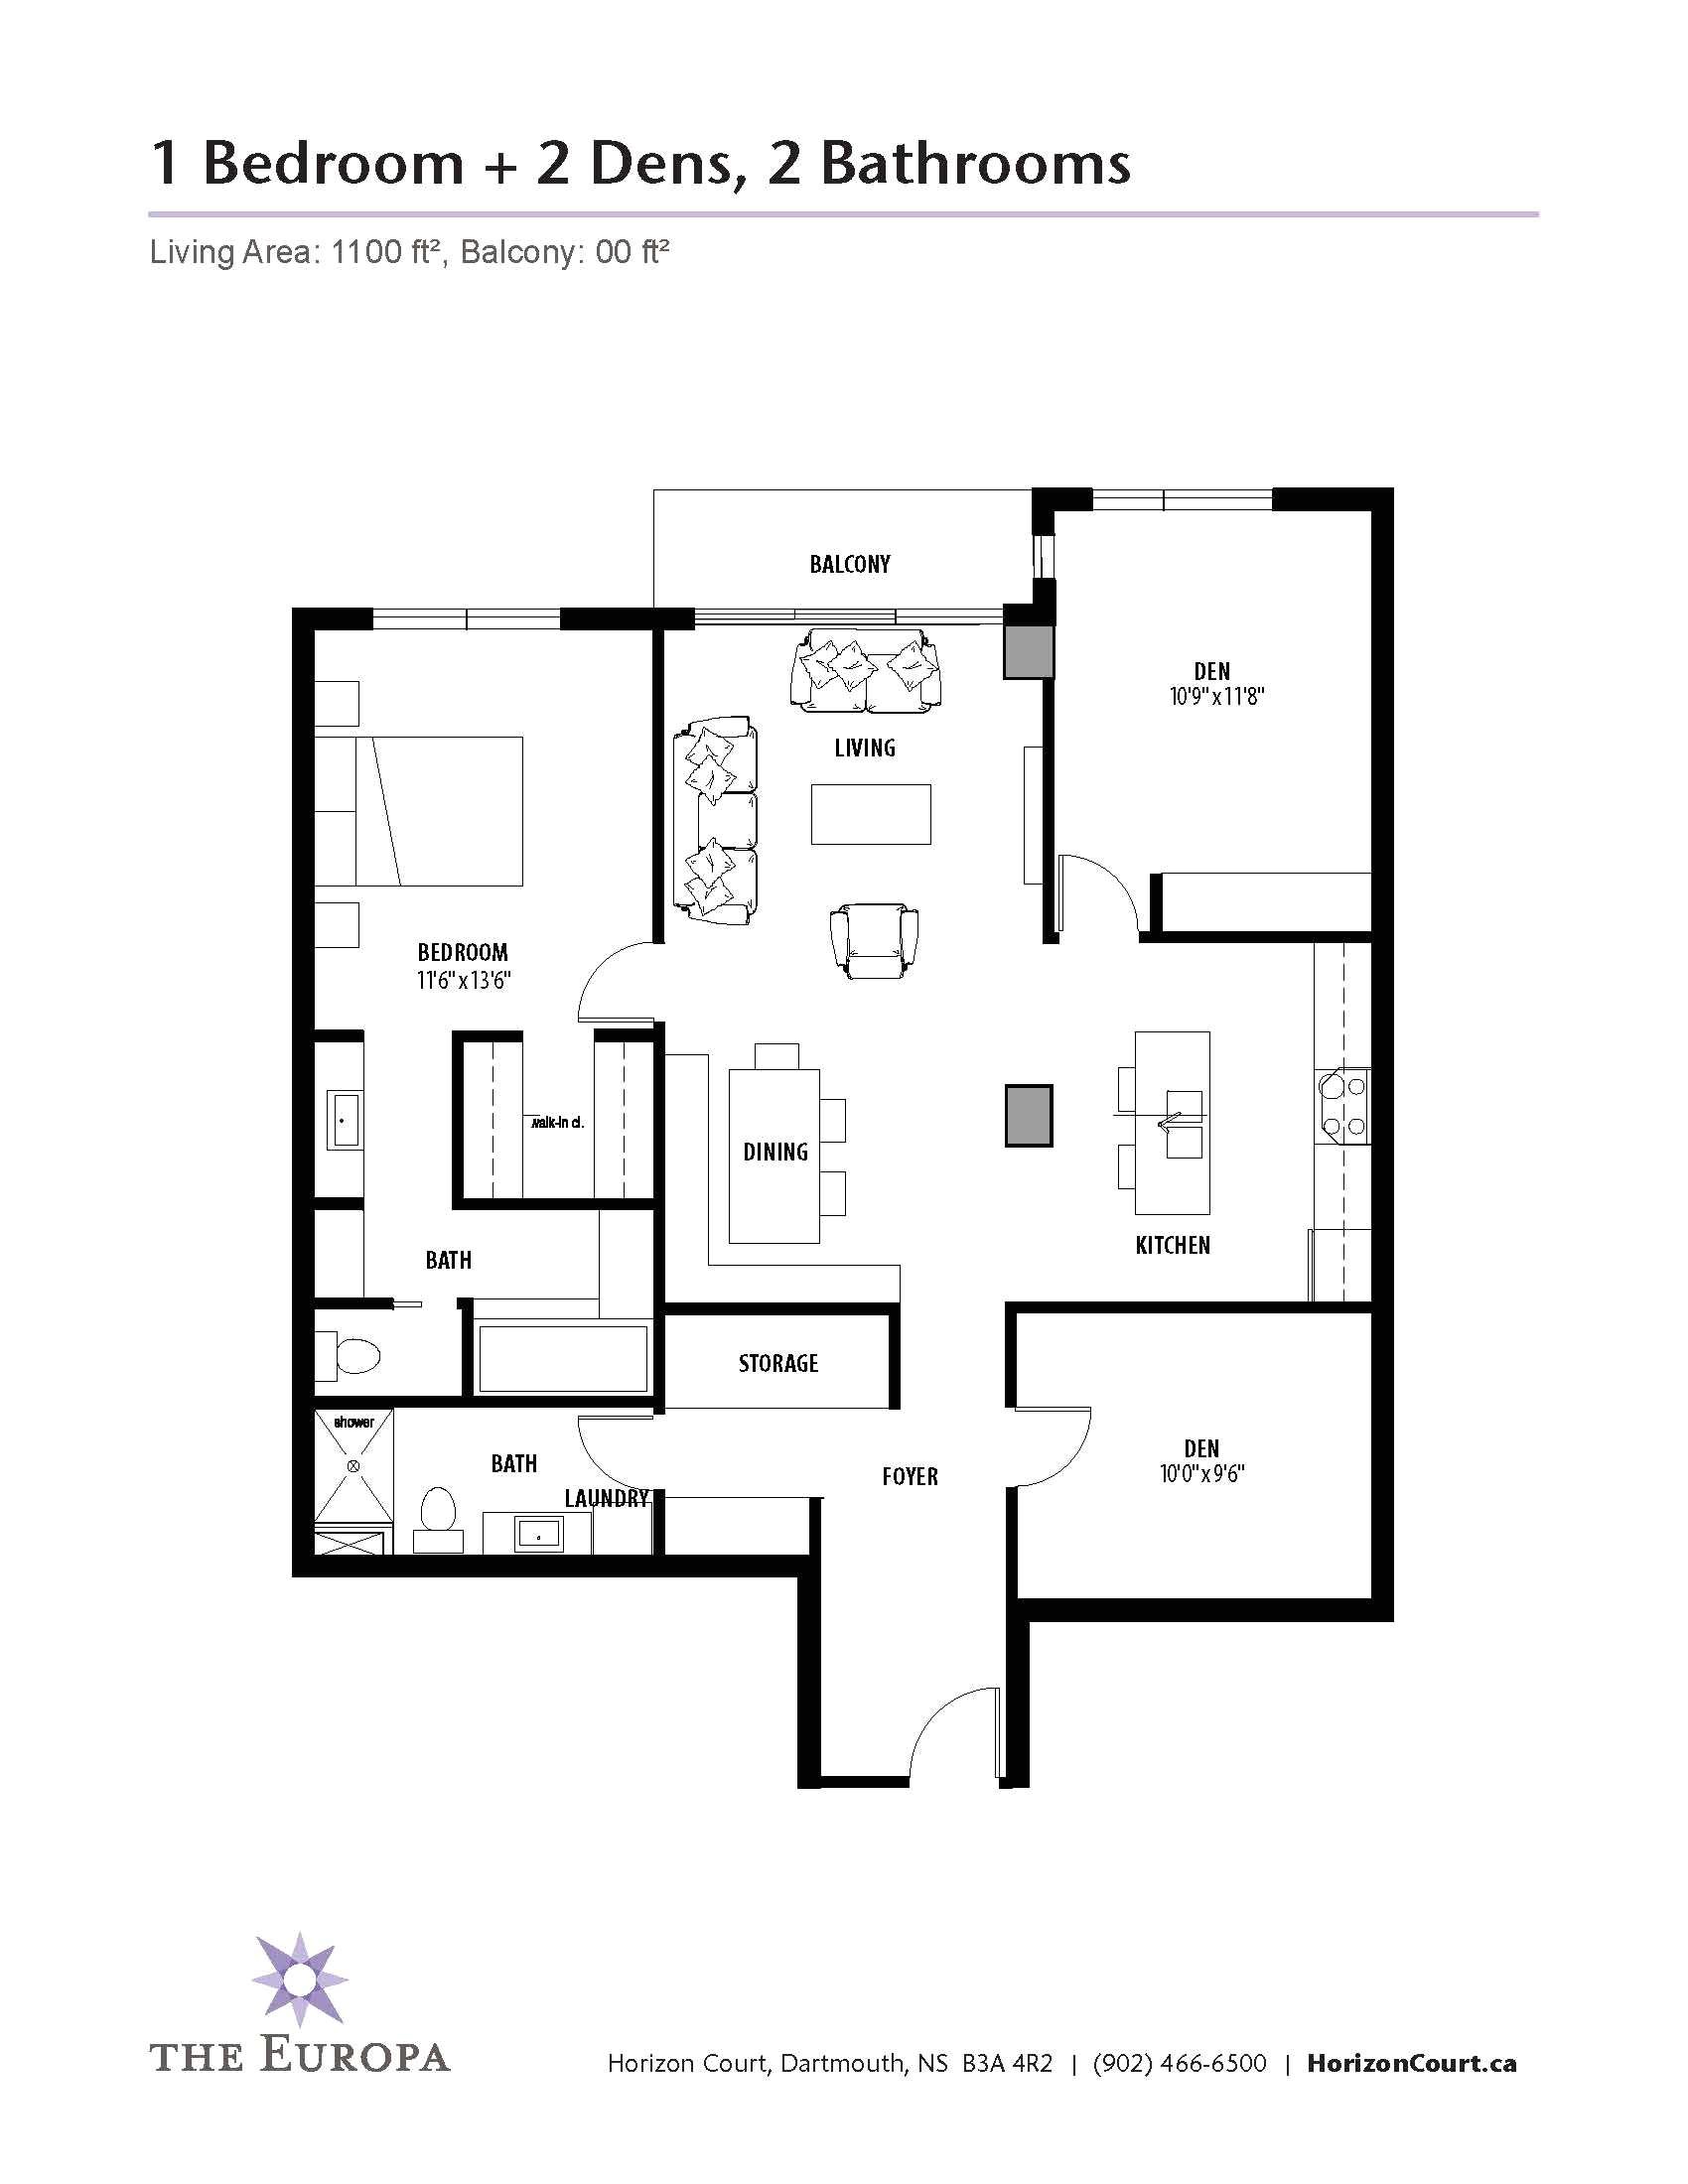 awesome 1 bedroom small house floor plans trends and beautiful new the europa of pictures best